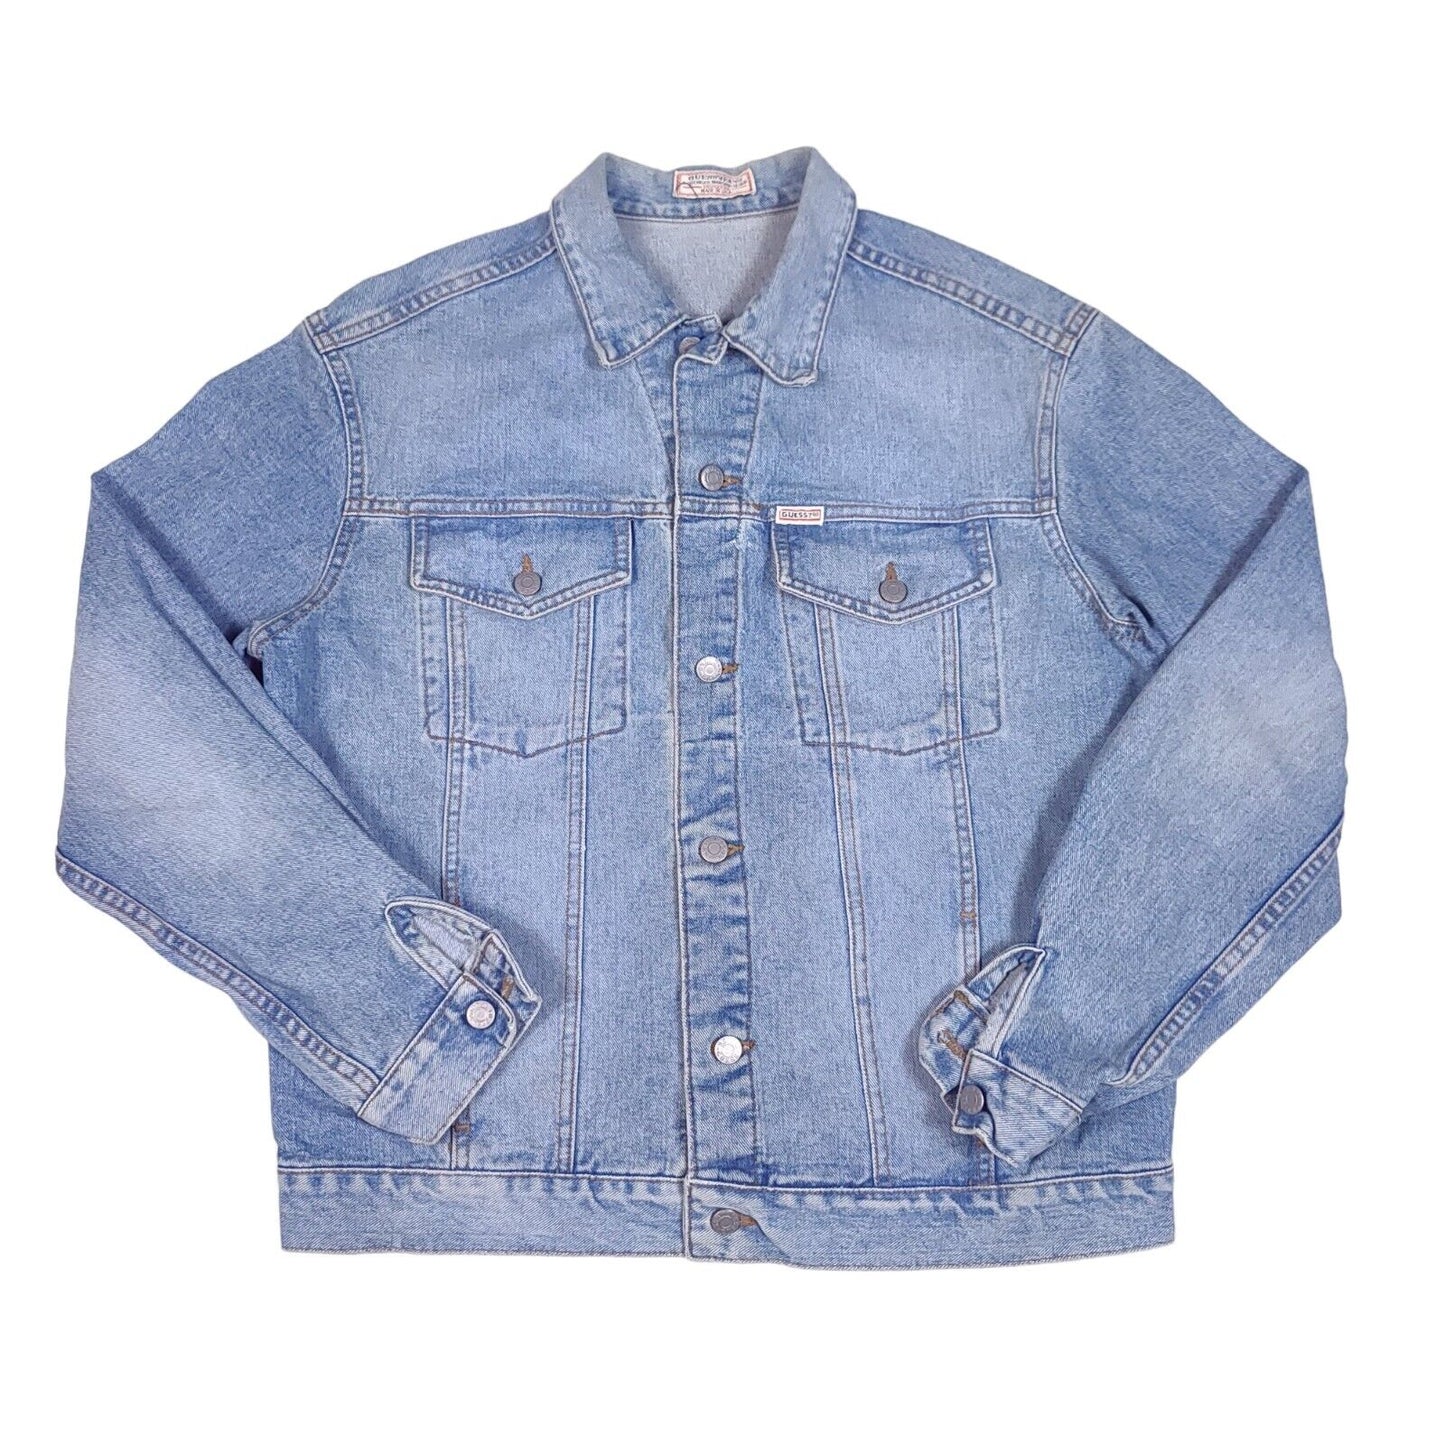 Guess Georges Marciano Blue Denim Jacket